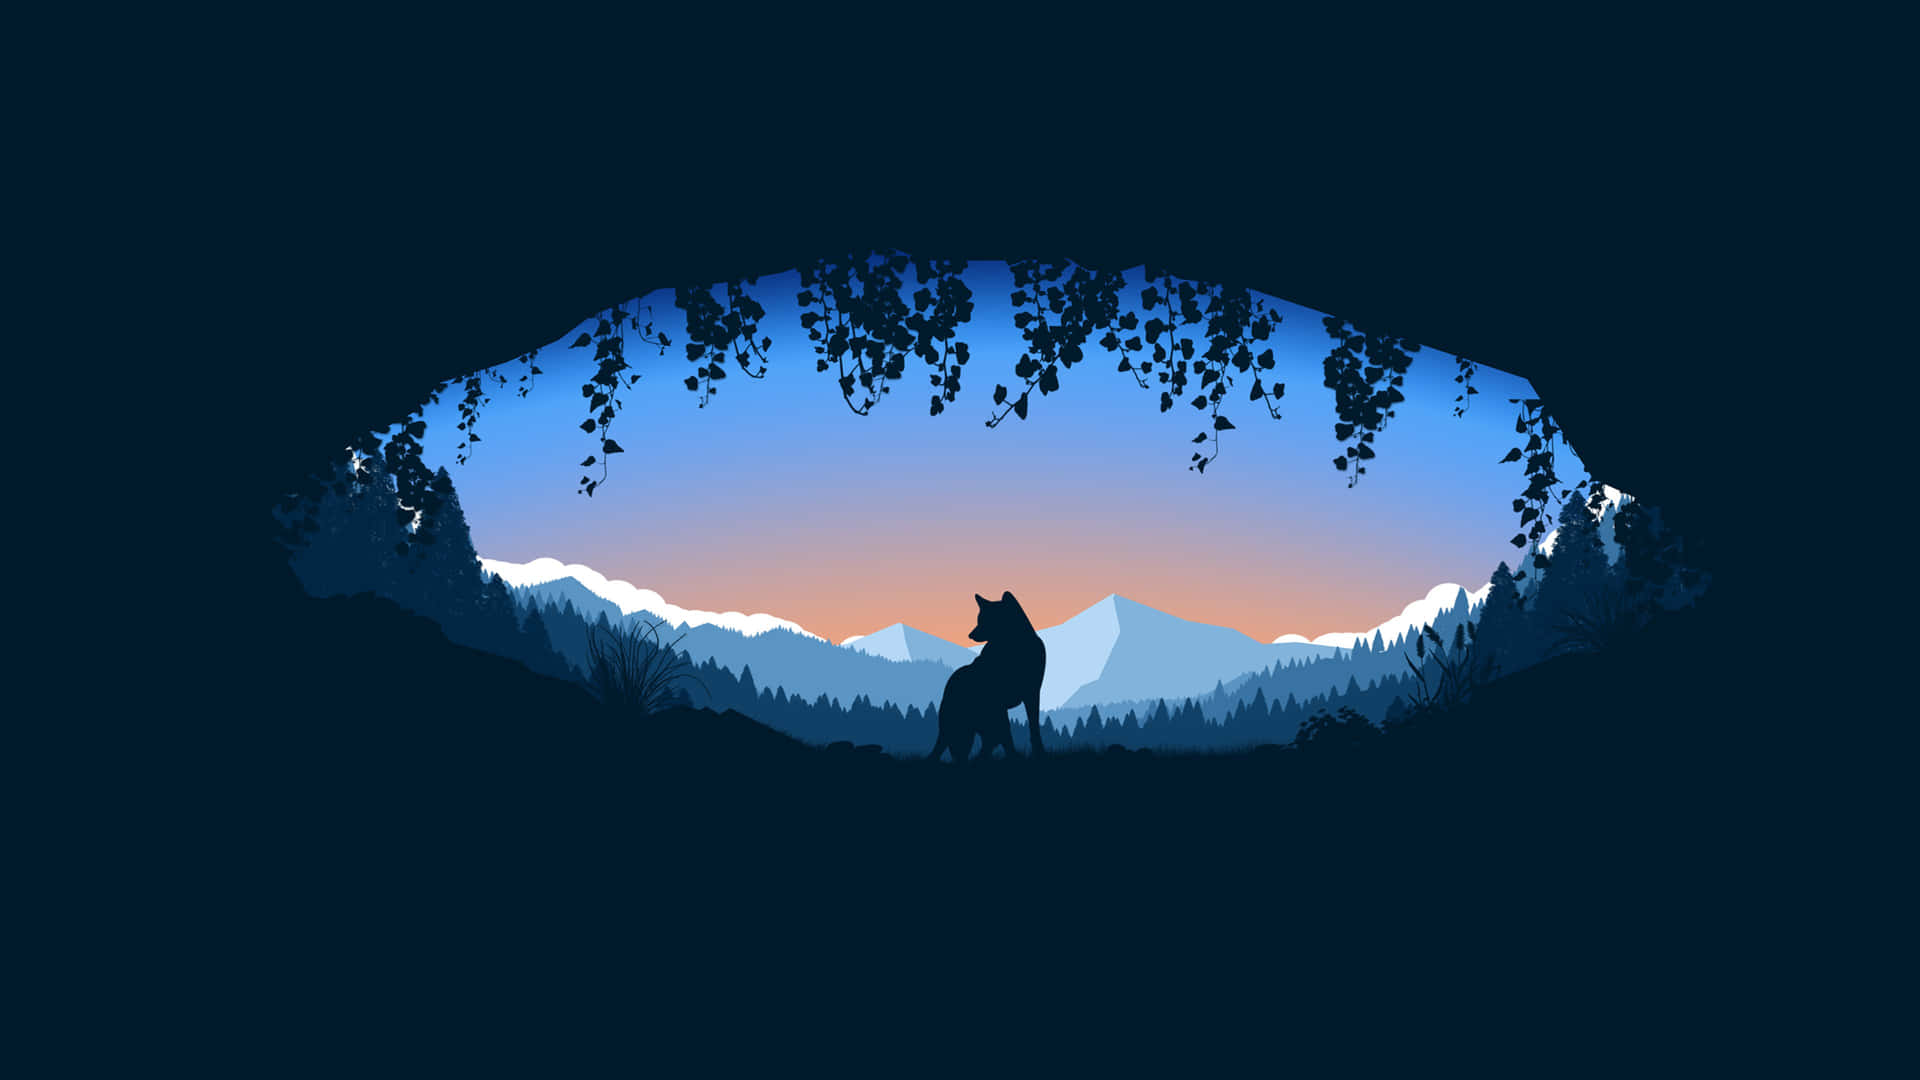 A Wolf Silhouette In The Mountains At Sunset Background